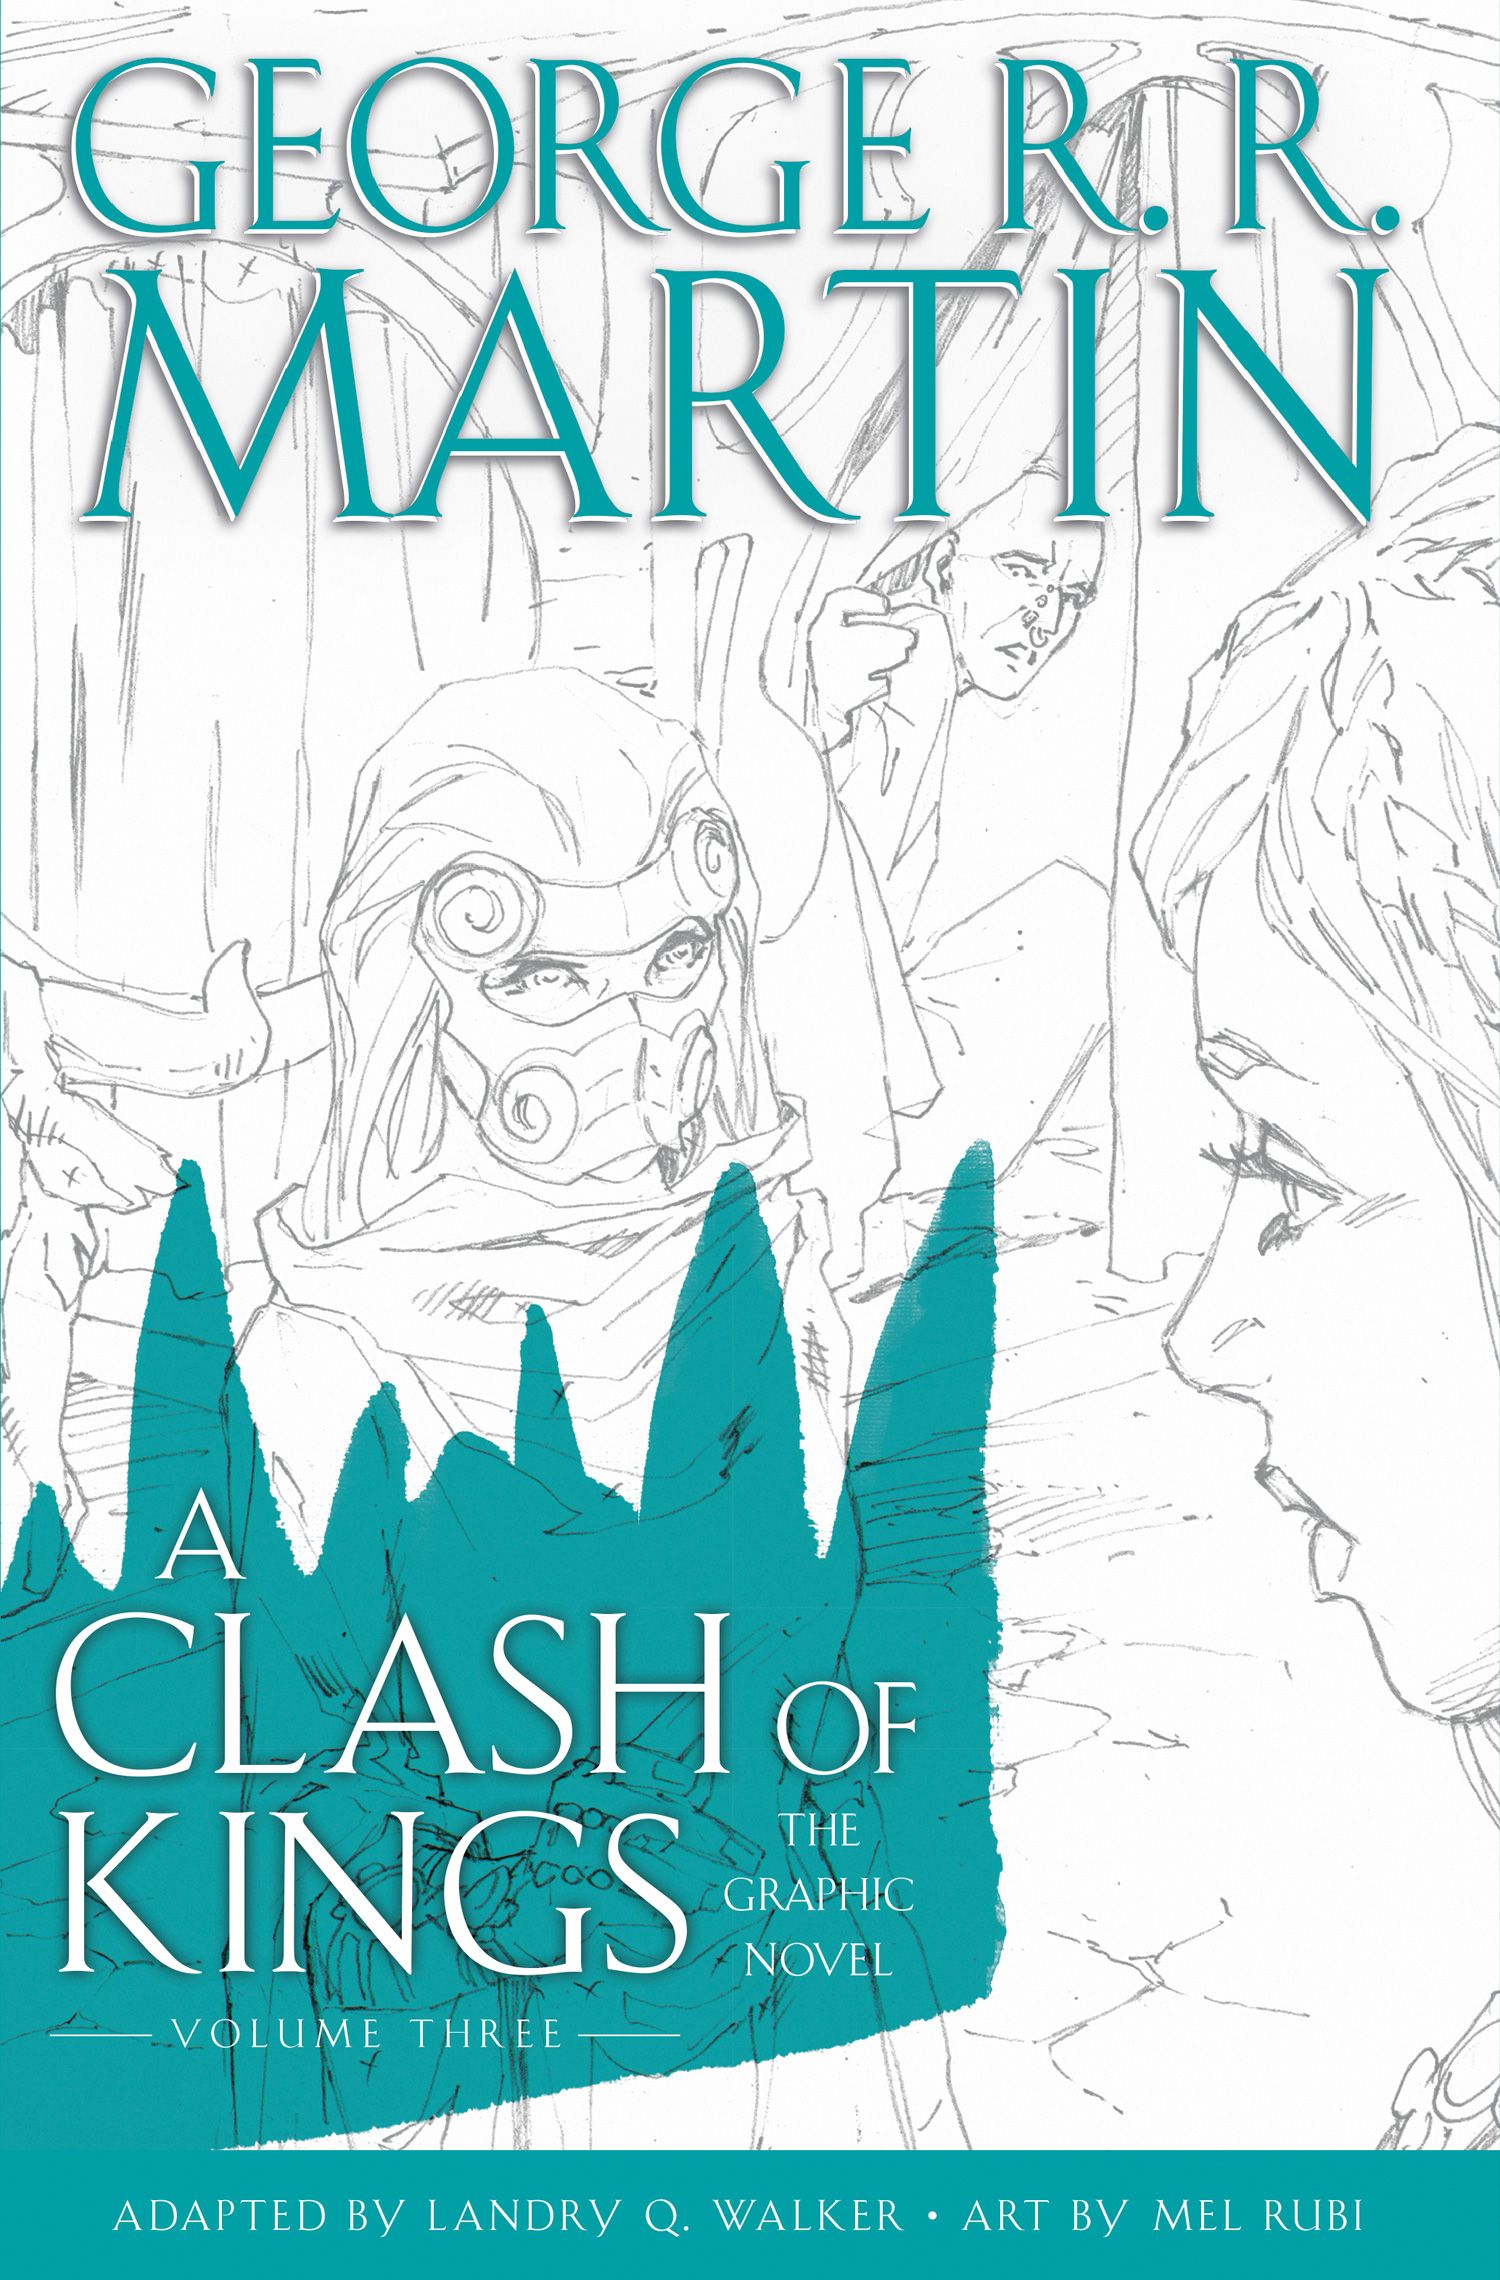 George R.R. Martin's A Clash of Kings